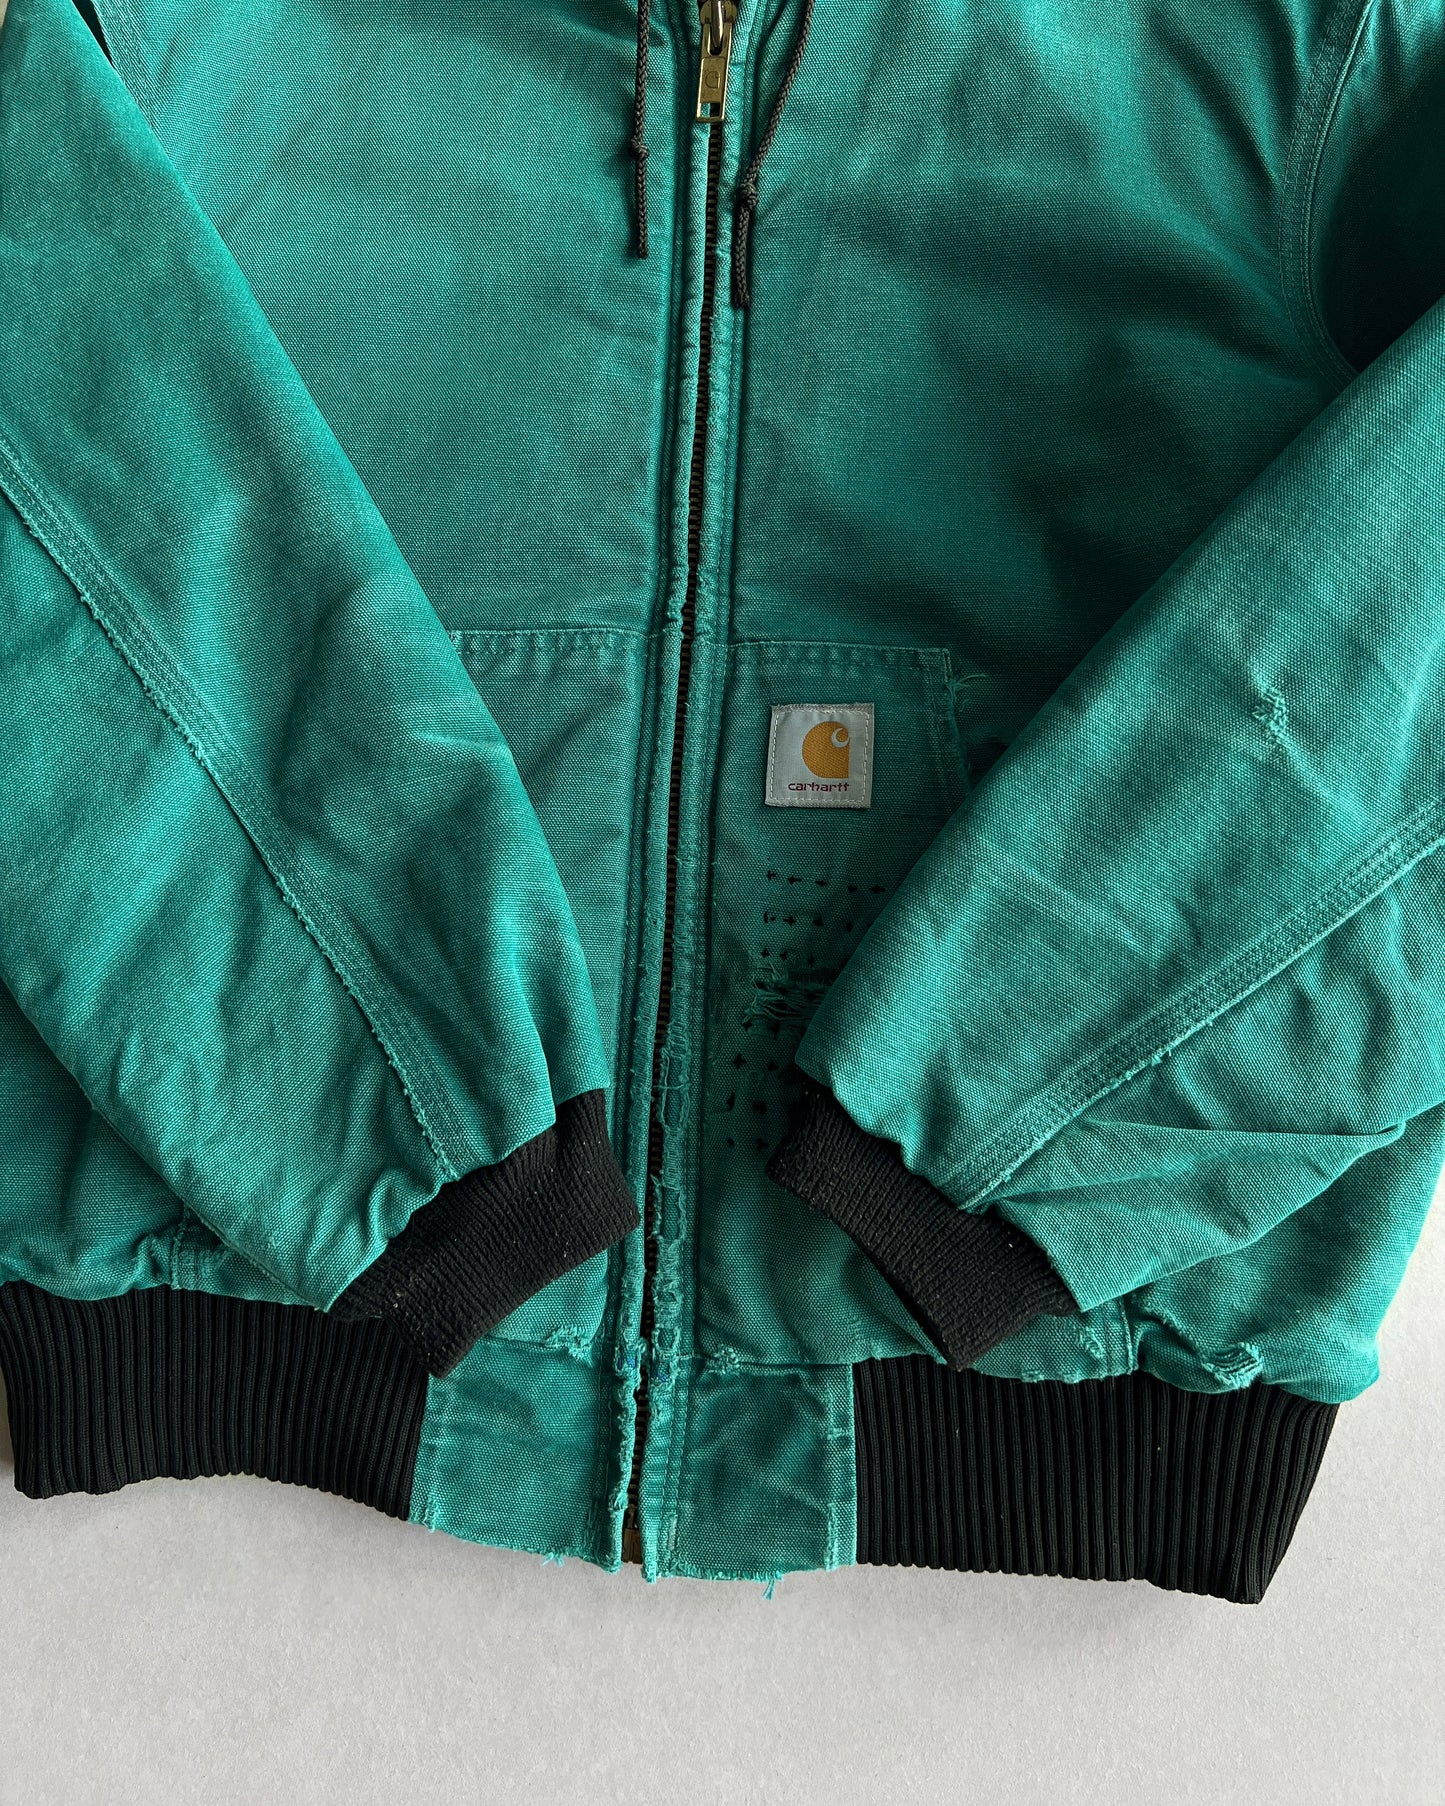 1990S TEAL GREEN CARHARTT REPAIRED HOODED WORK JACKET (L)